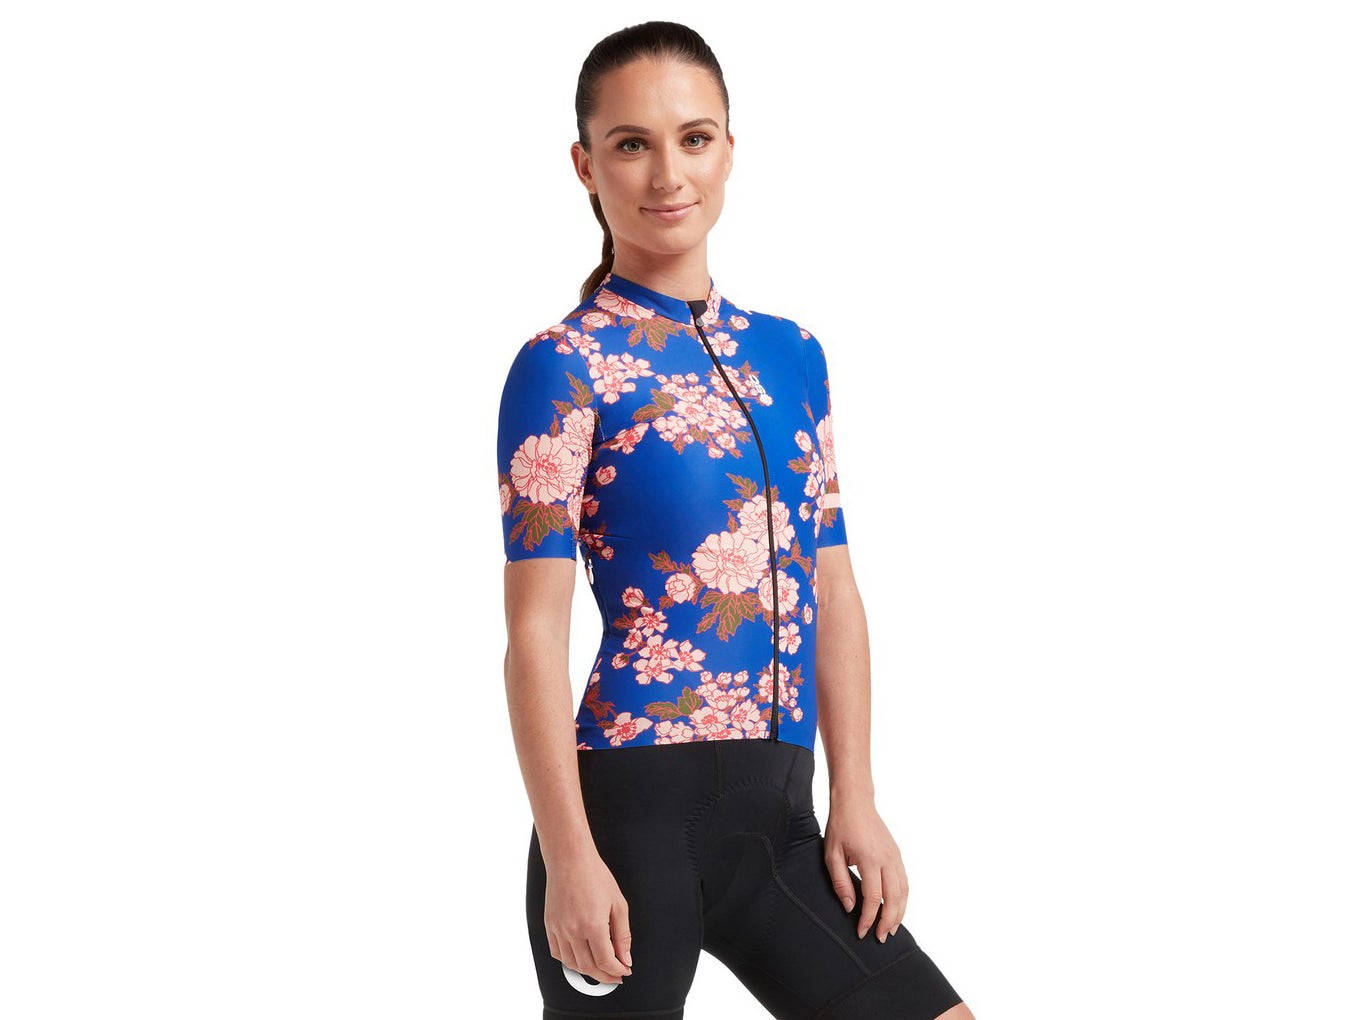 Women Cycling Short Sleeve Jersey Bike Bicycle Clothing Flowers Jacket with Big Reflective Tape 